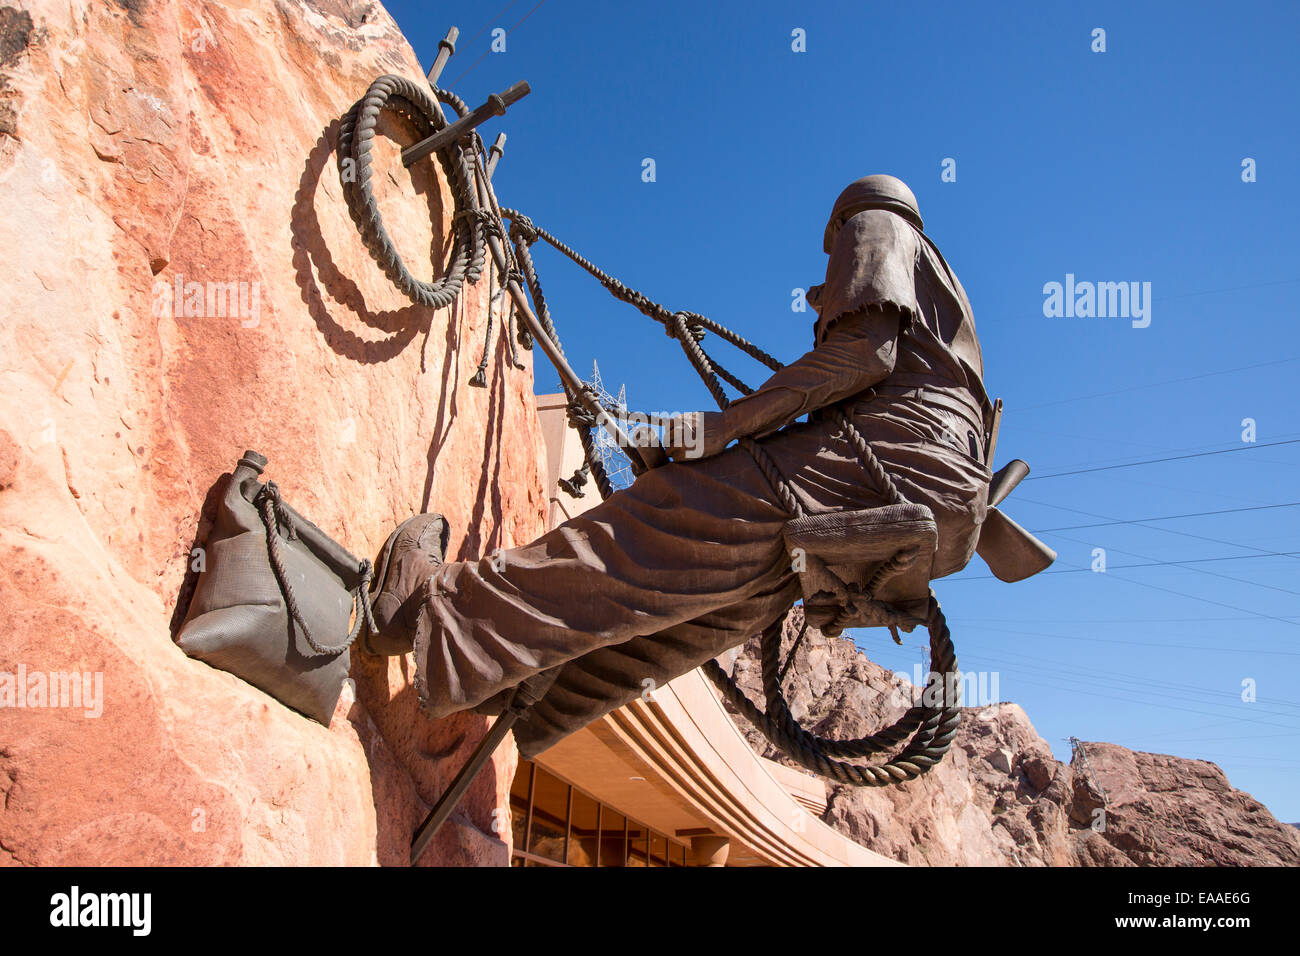 A sculpture of a construction worker at the Hoover Dam and Lake Mead hydro electric plant. Stock Photo